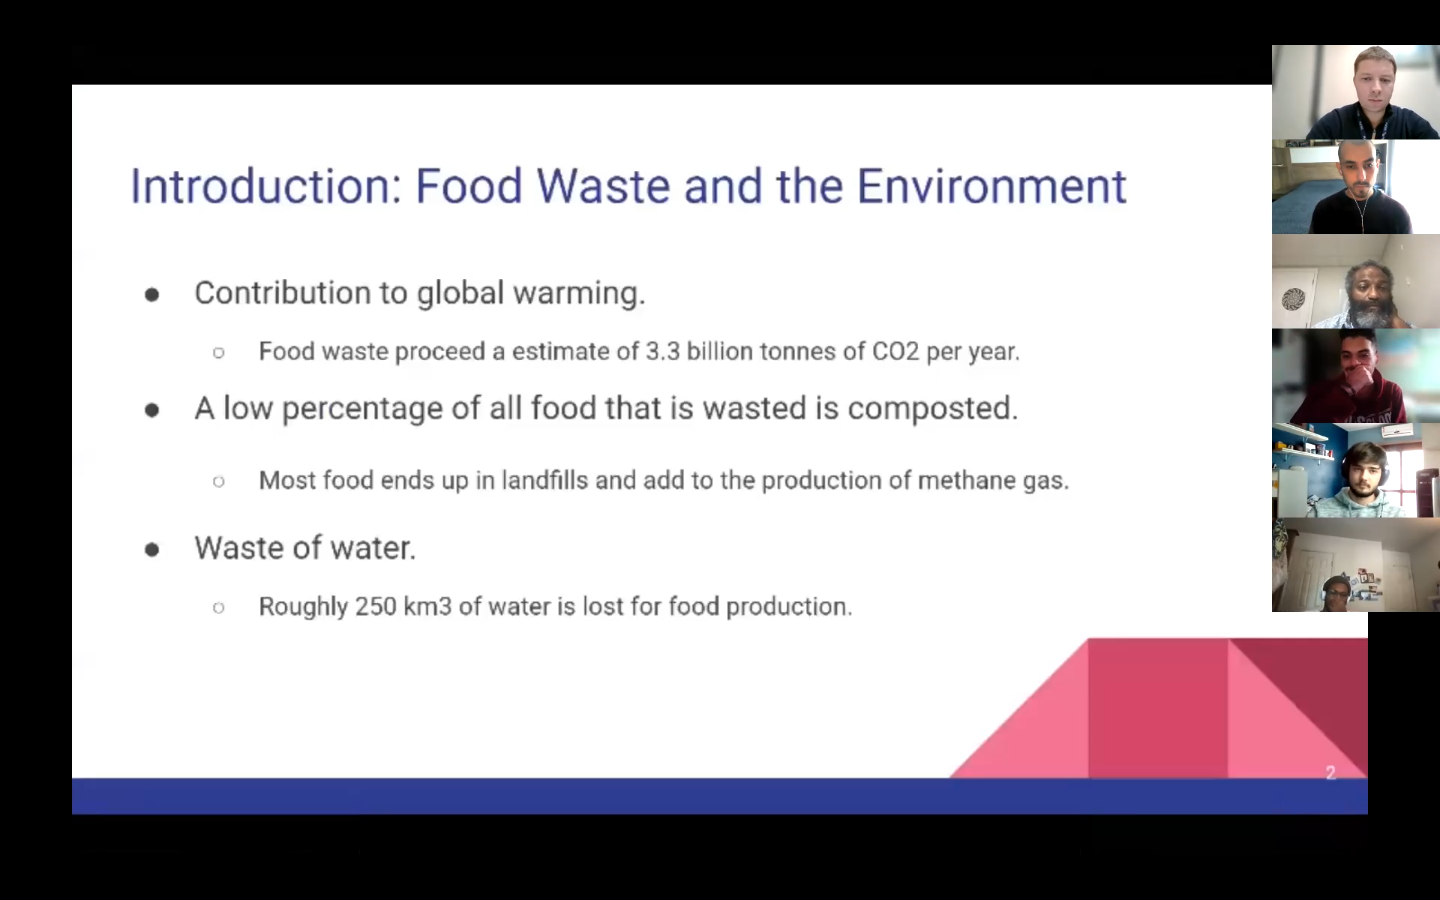 PowerPoint slide on food waste with images of engaged students and faculty on the side